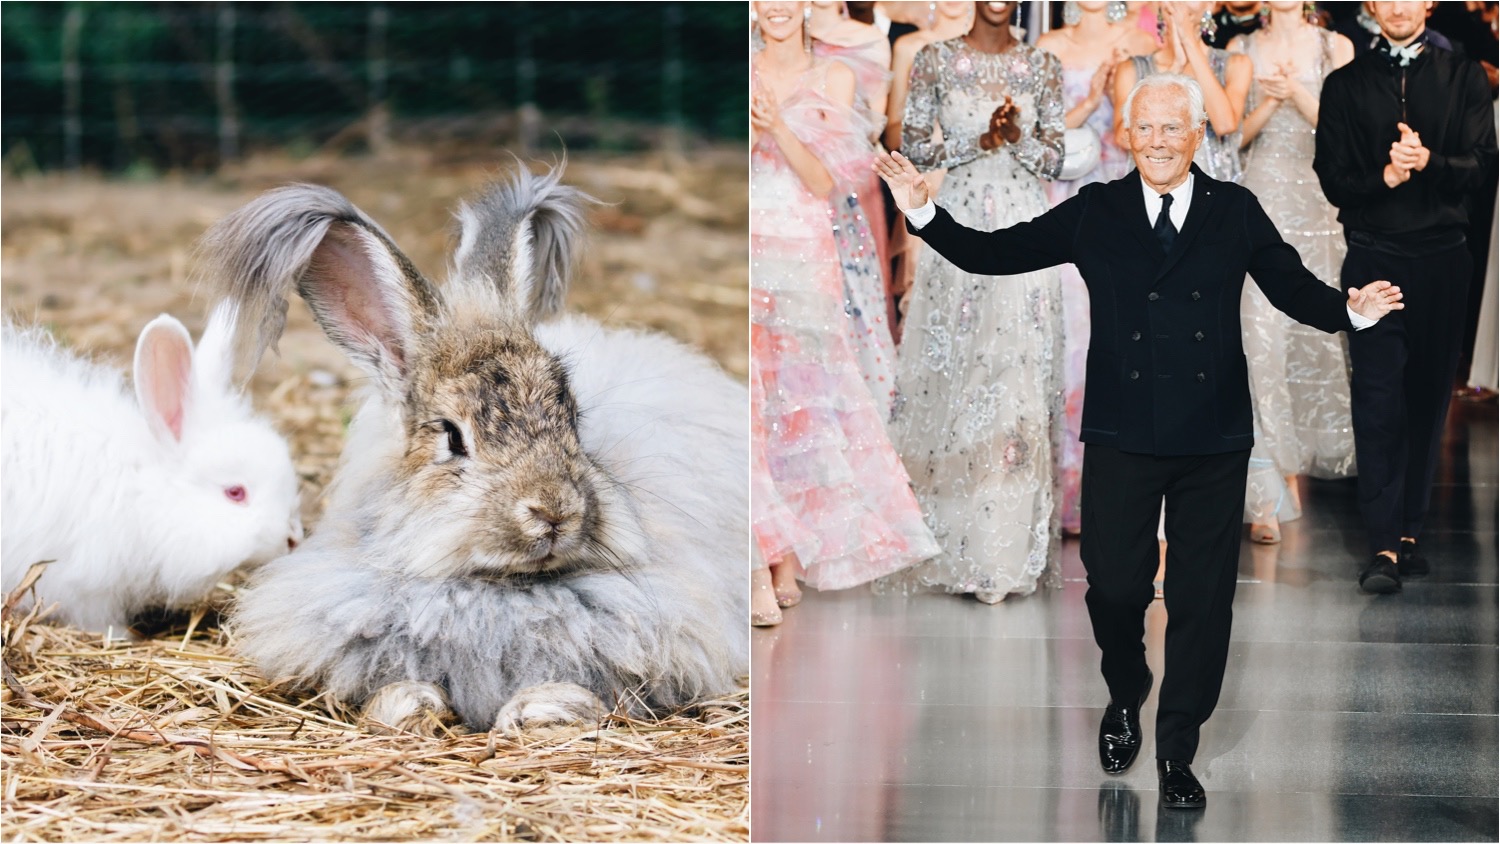 Split image shows an angora rabbit (the source of angora wool) on the left, and Giorgio Armani on the right.